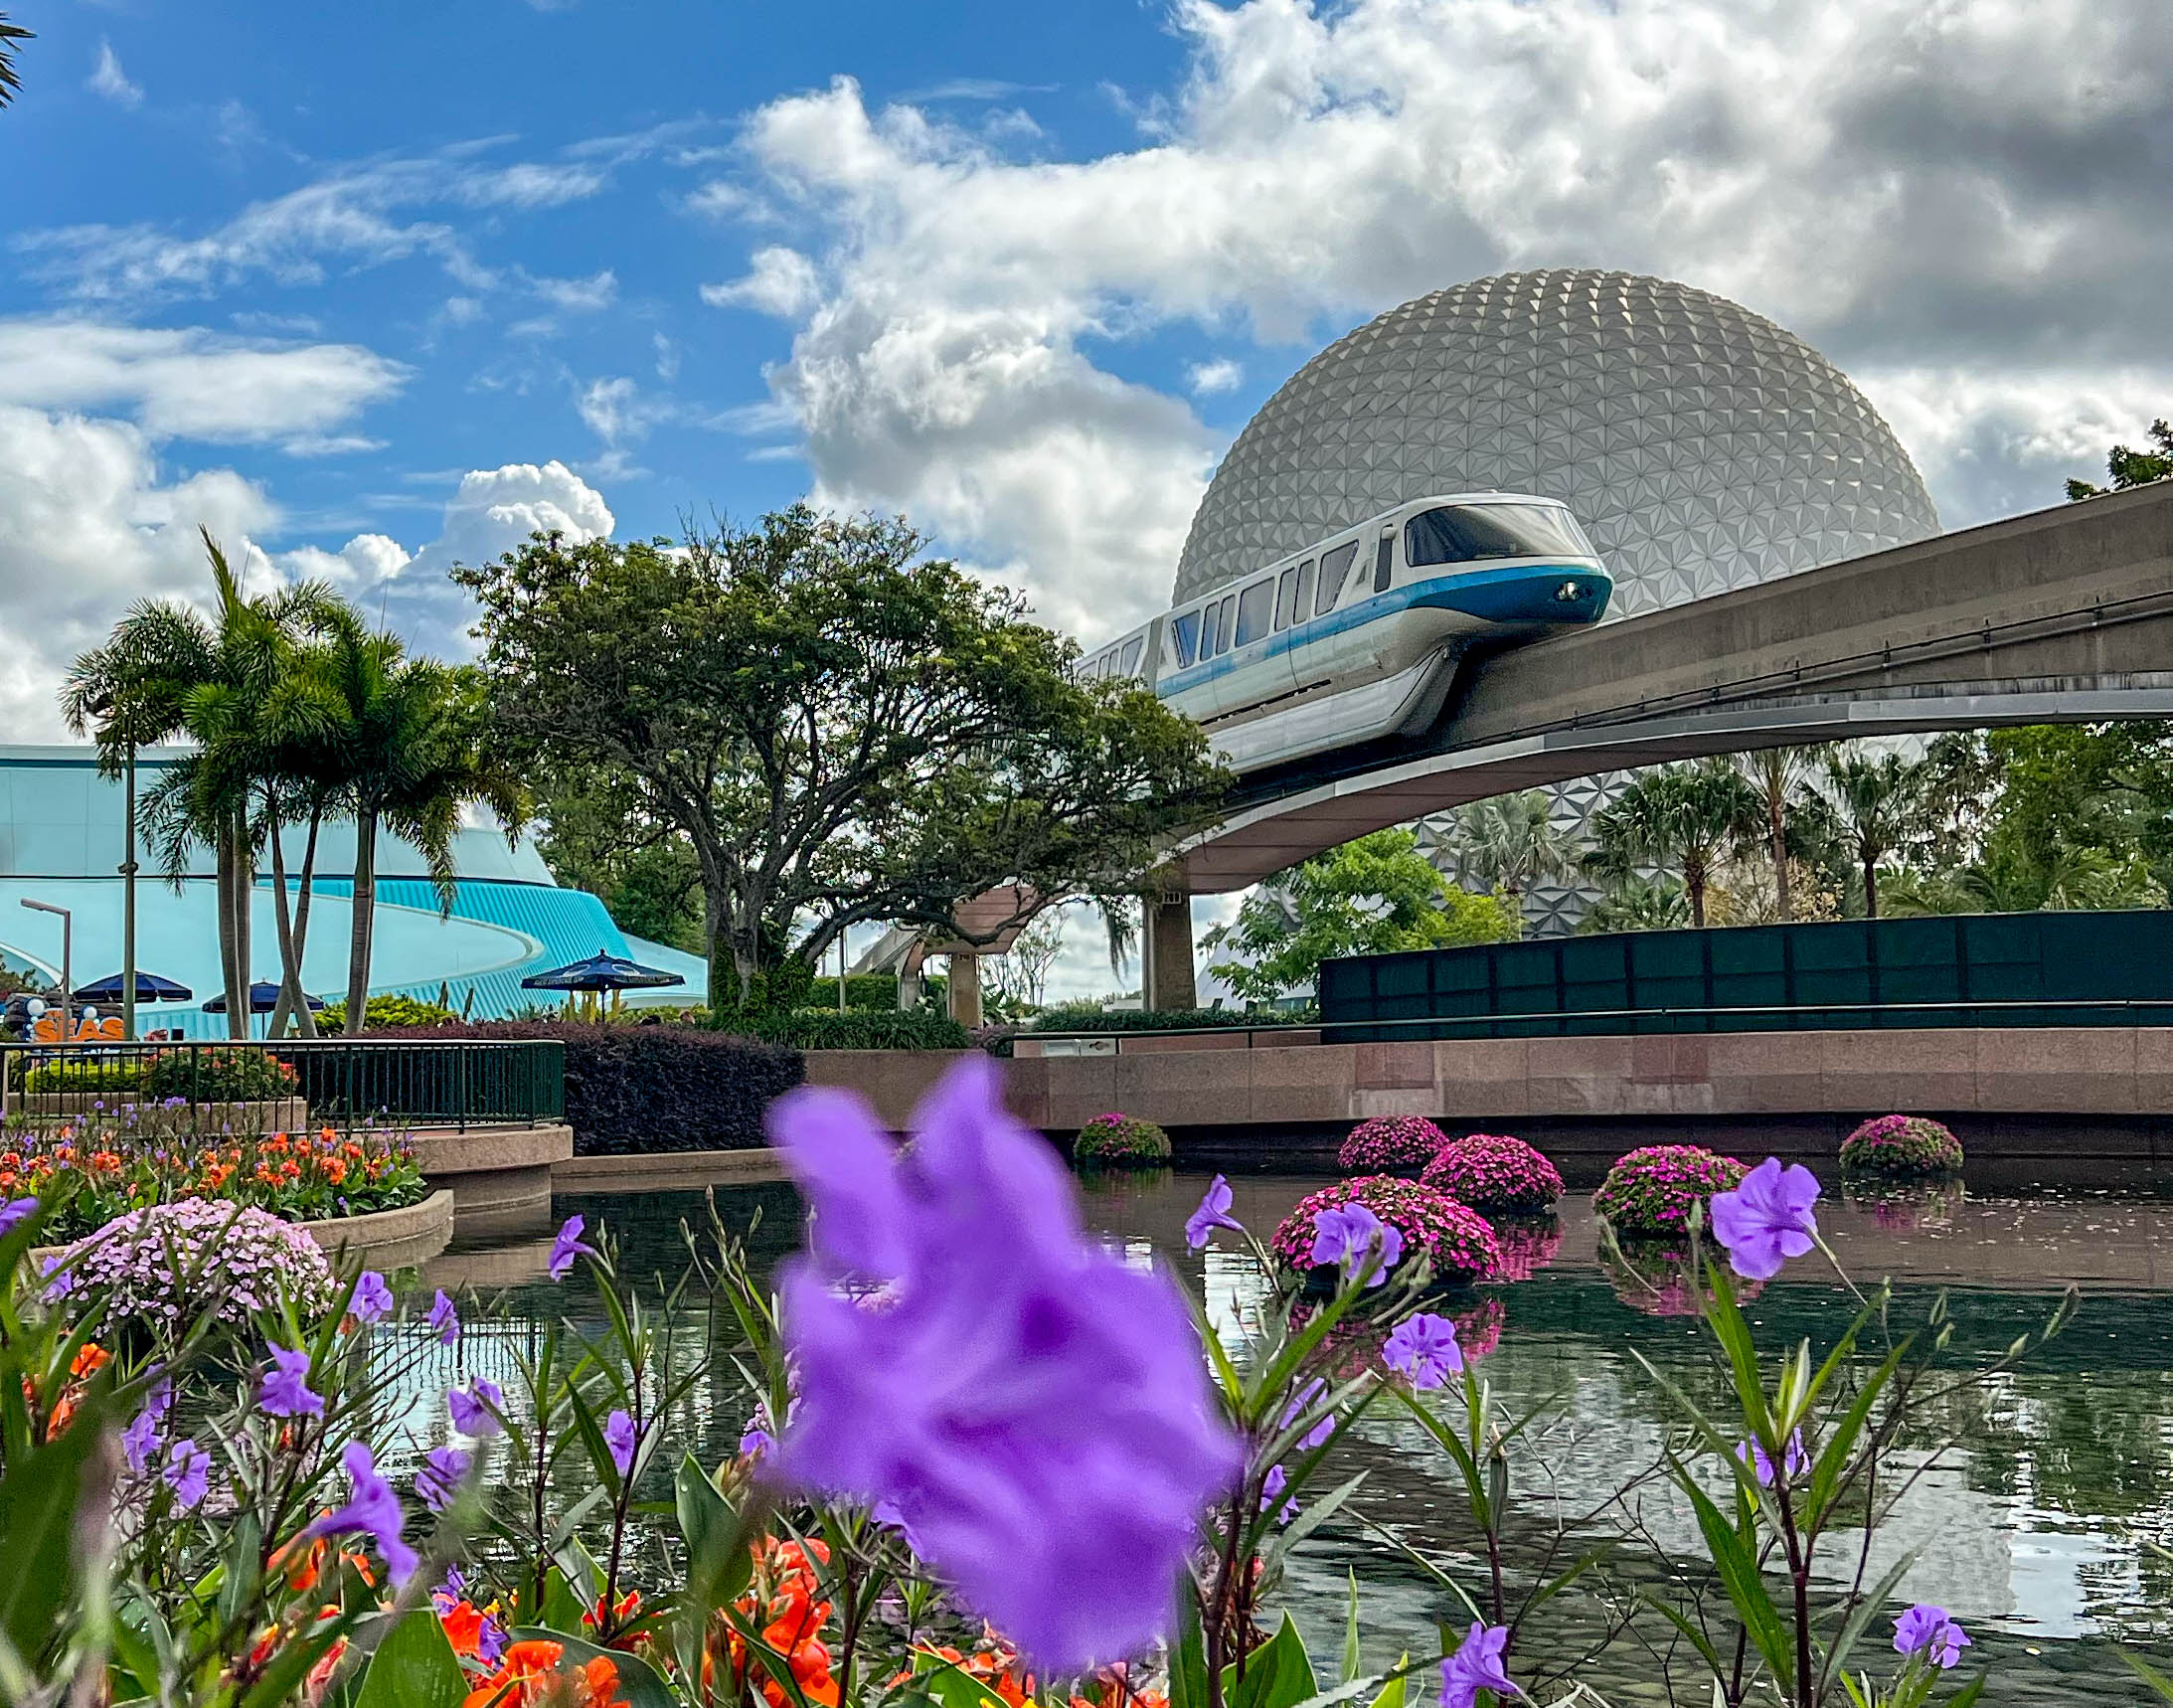 Monorail in EPCOT